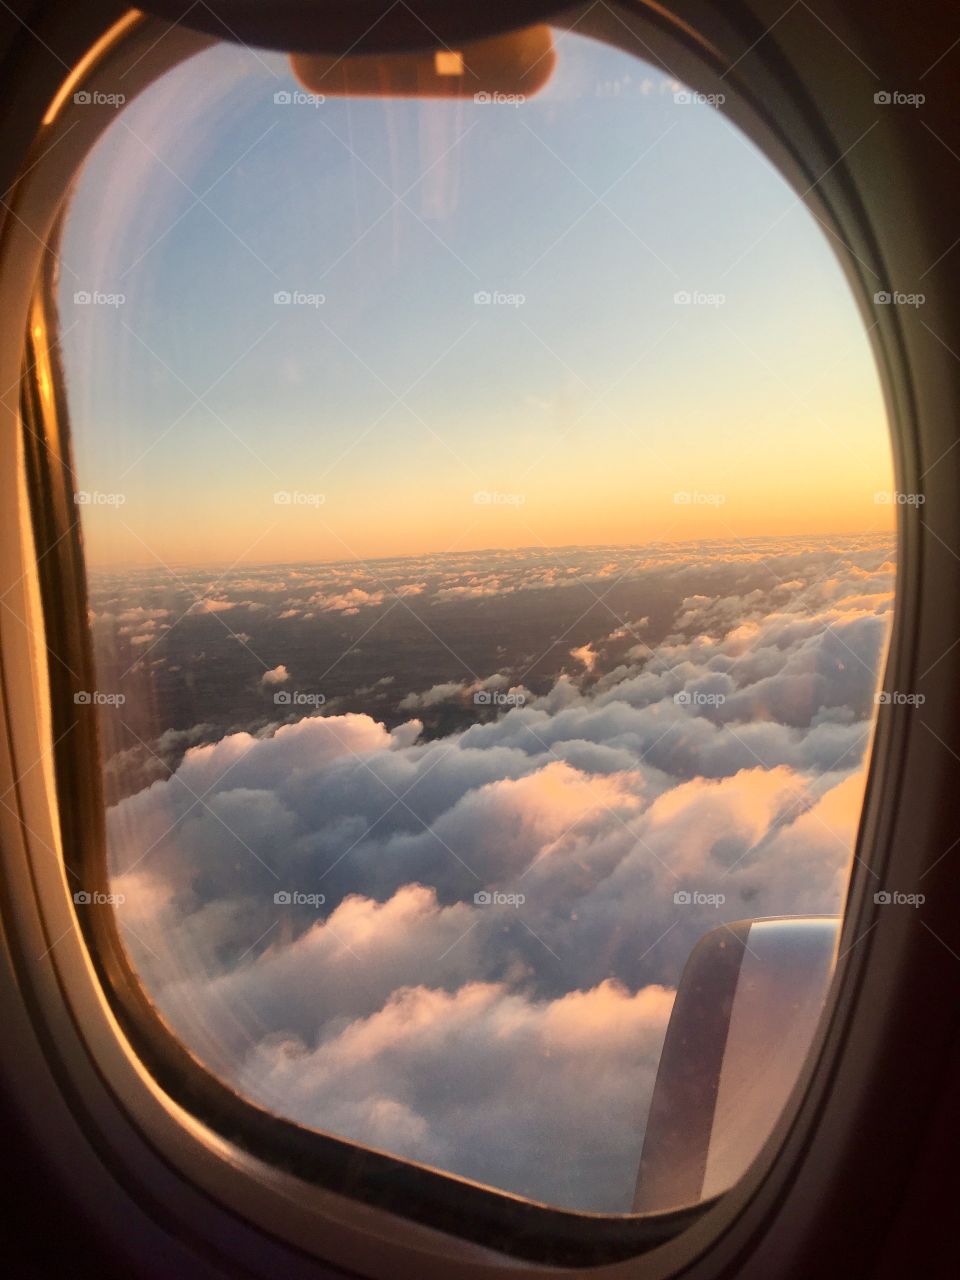 Looking out at the sky at sunrise from an airplane window 